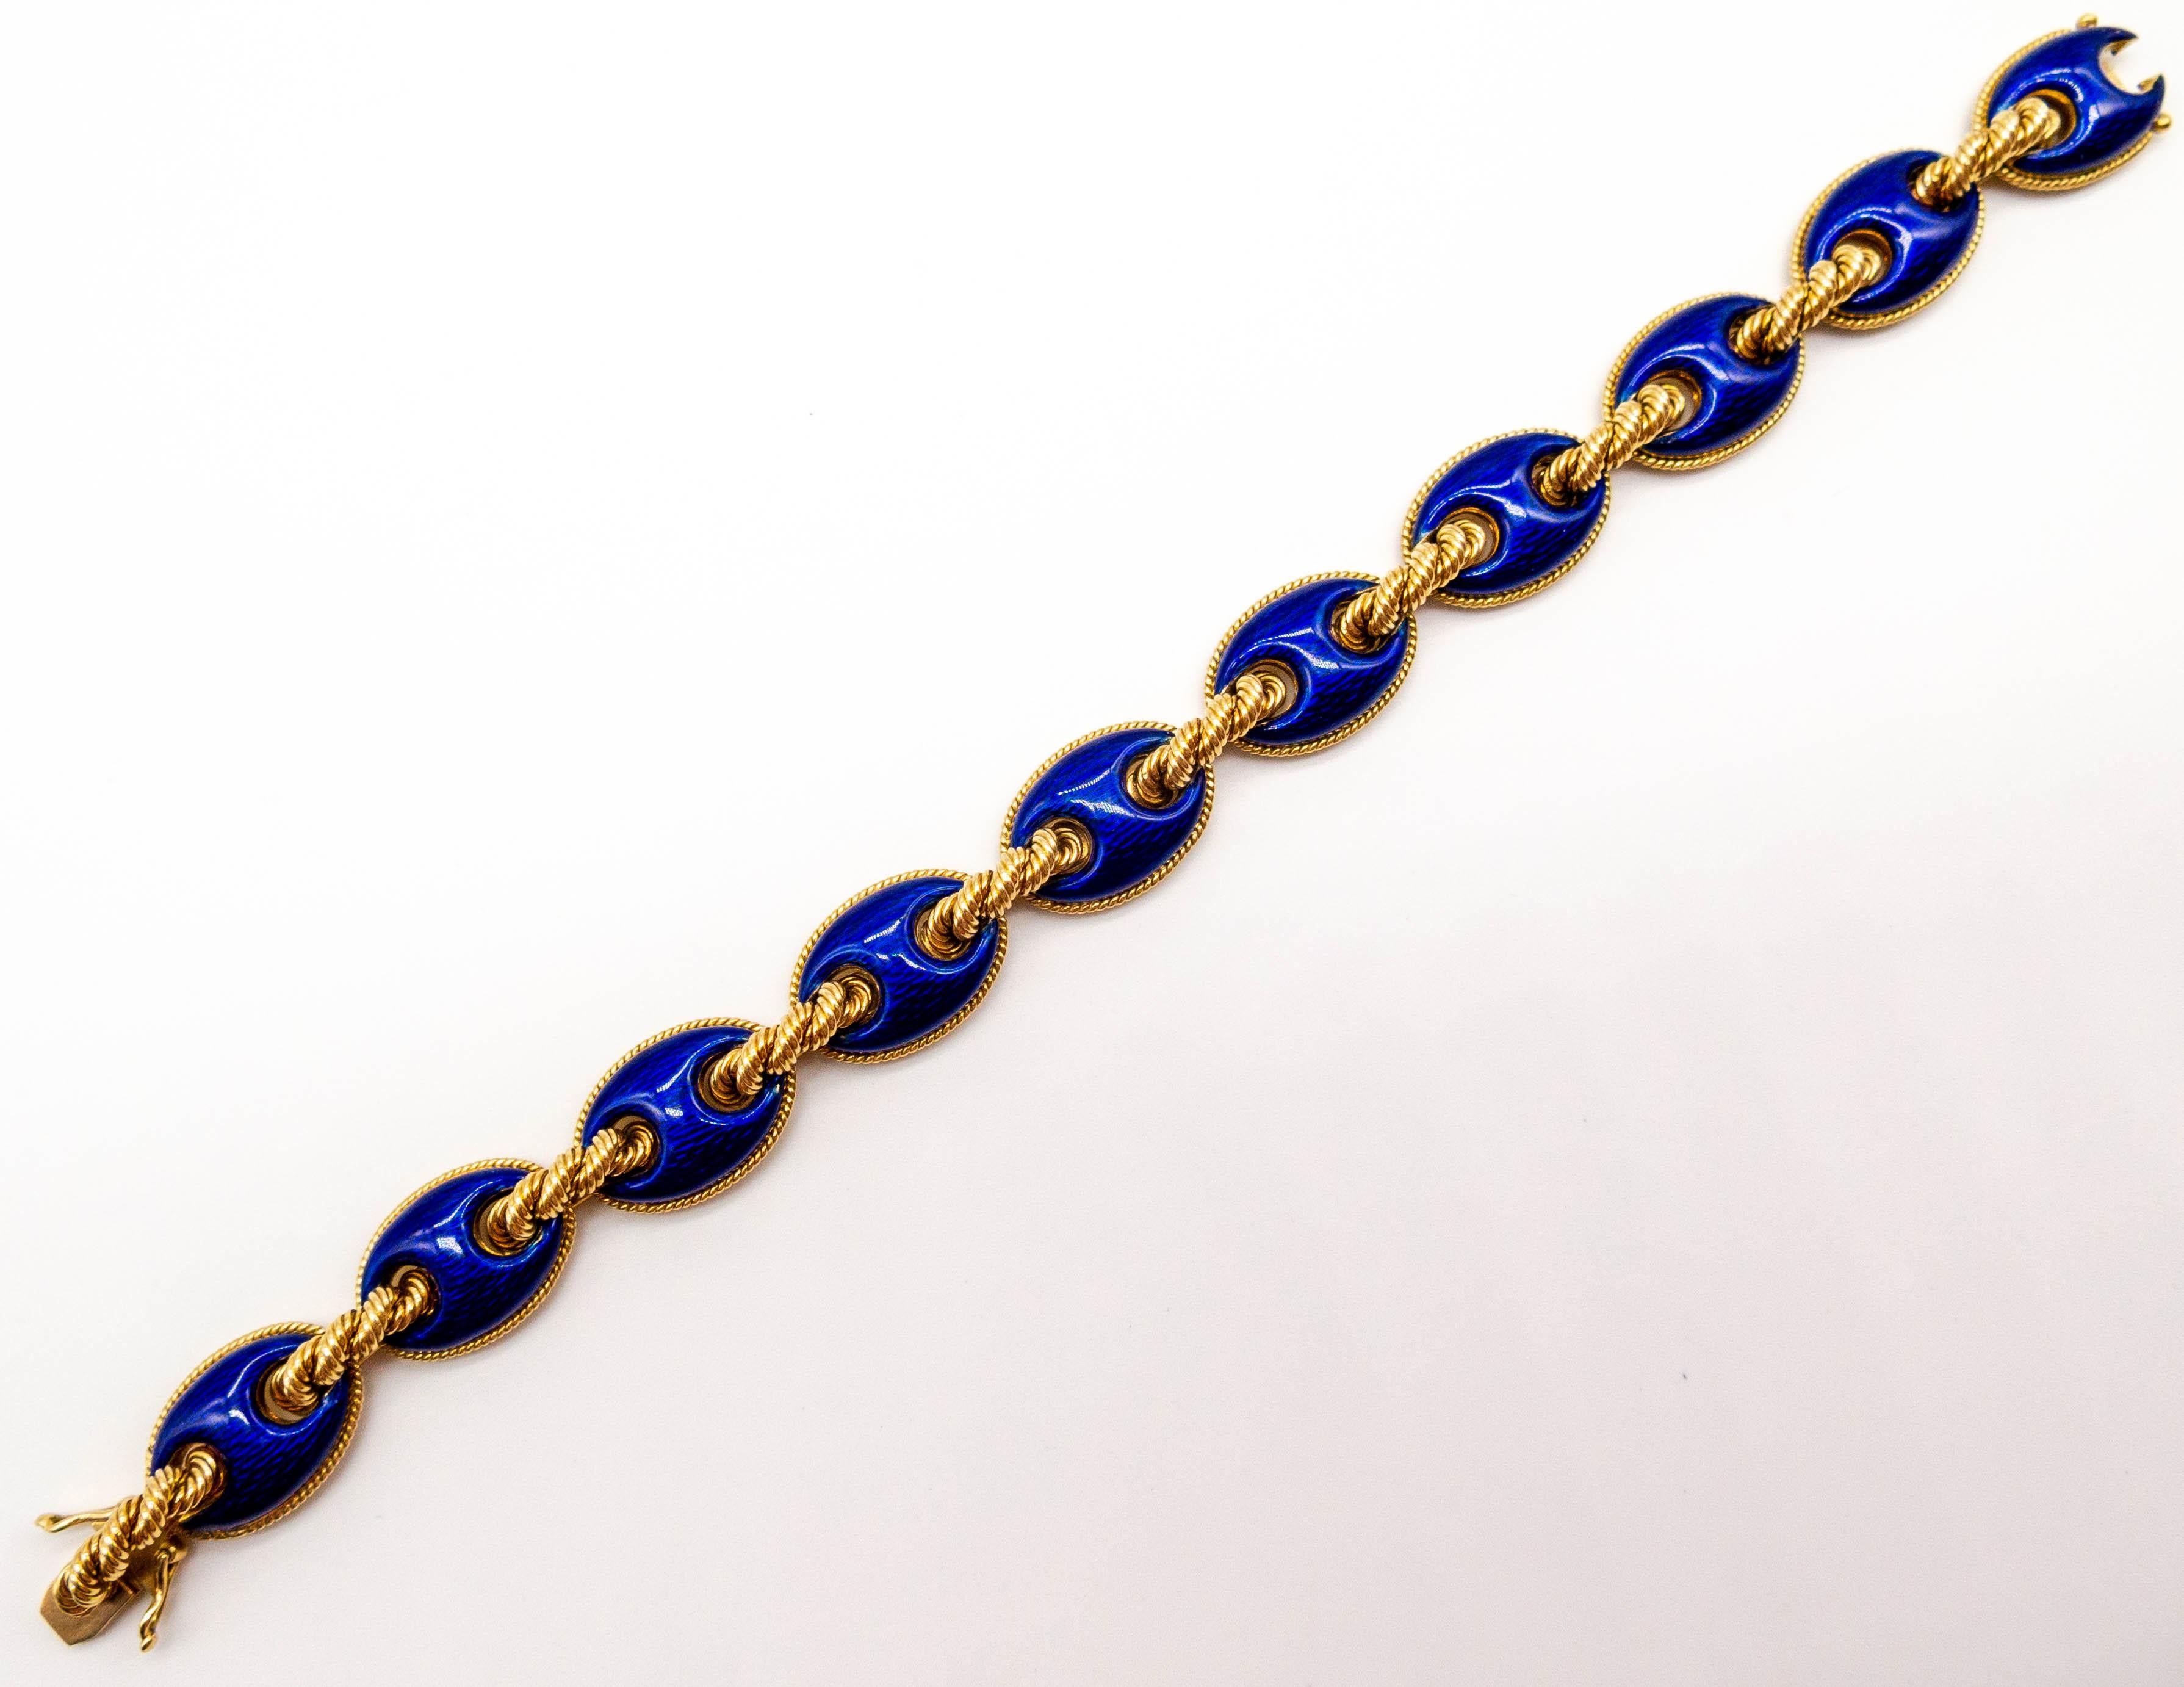 A superbly elegant and refined gold and deep blue enamel bracelet with 3/4